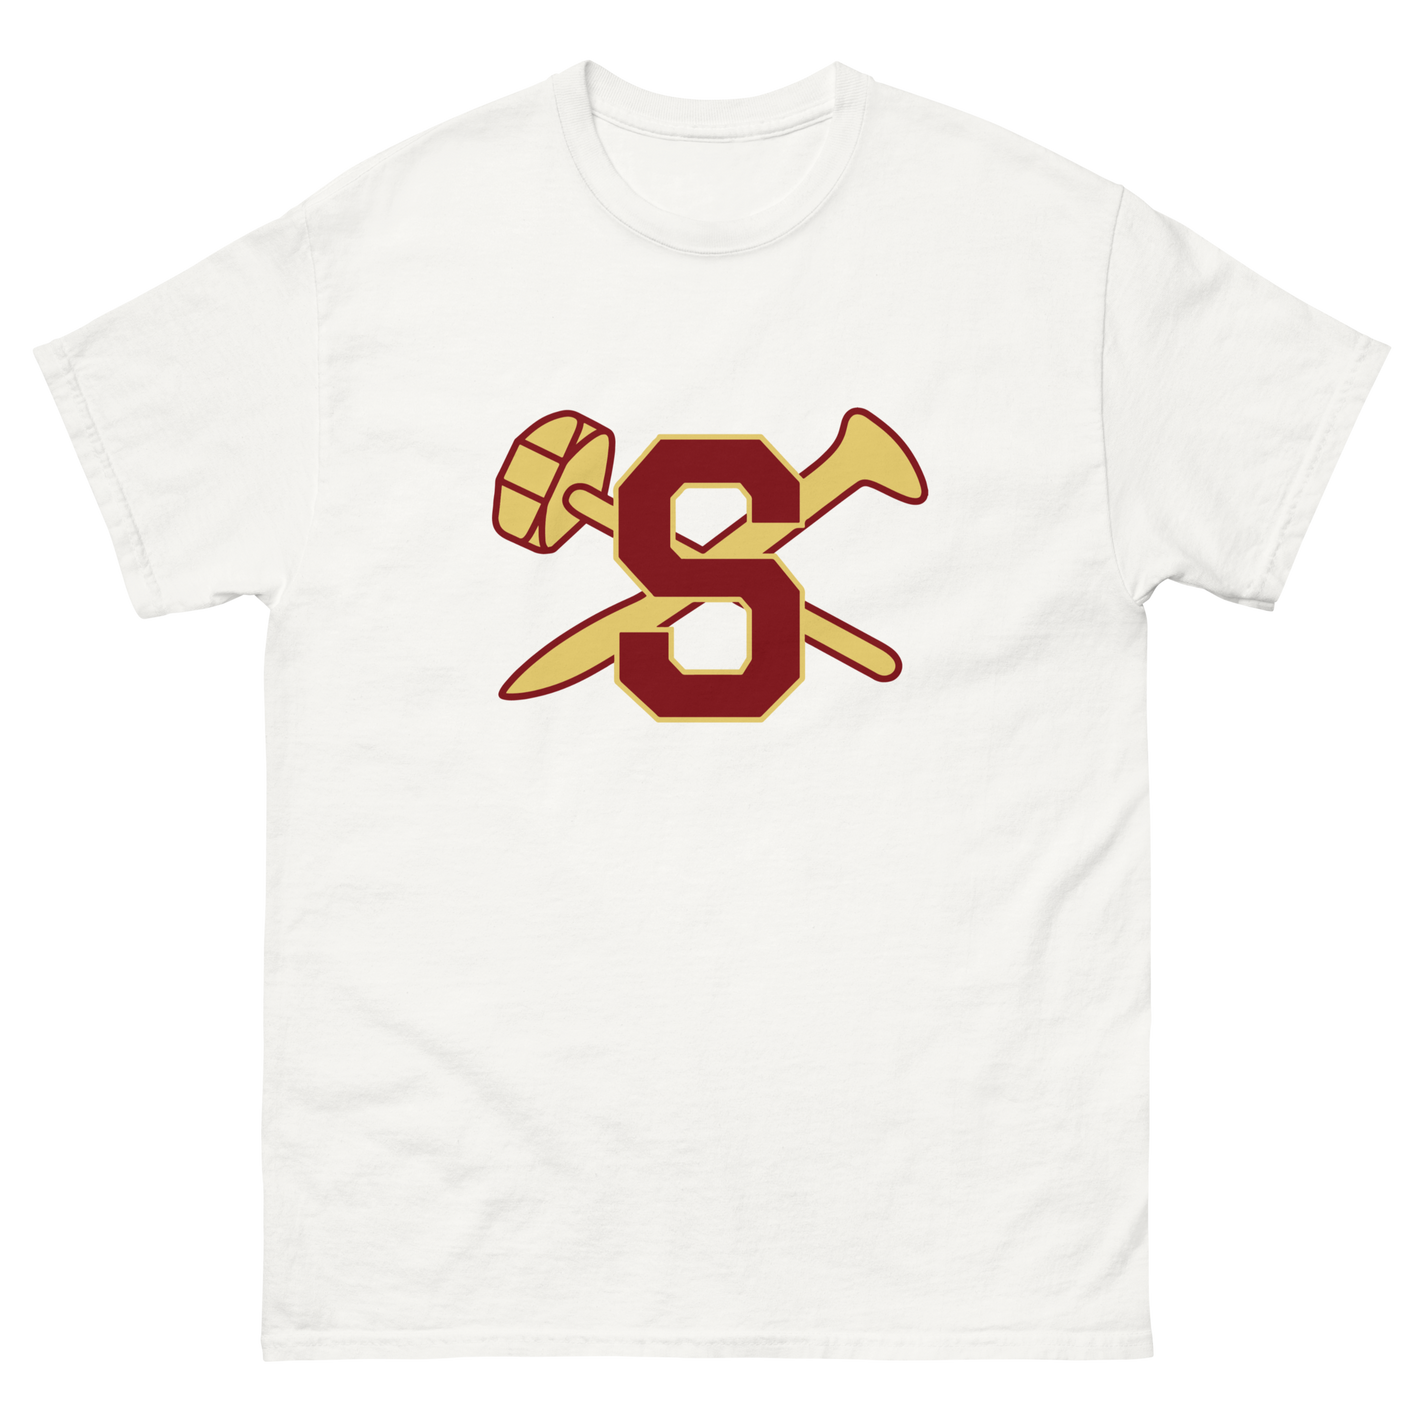 Sparks Men's classic tee